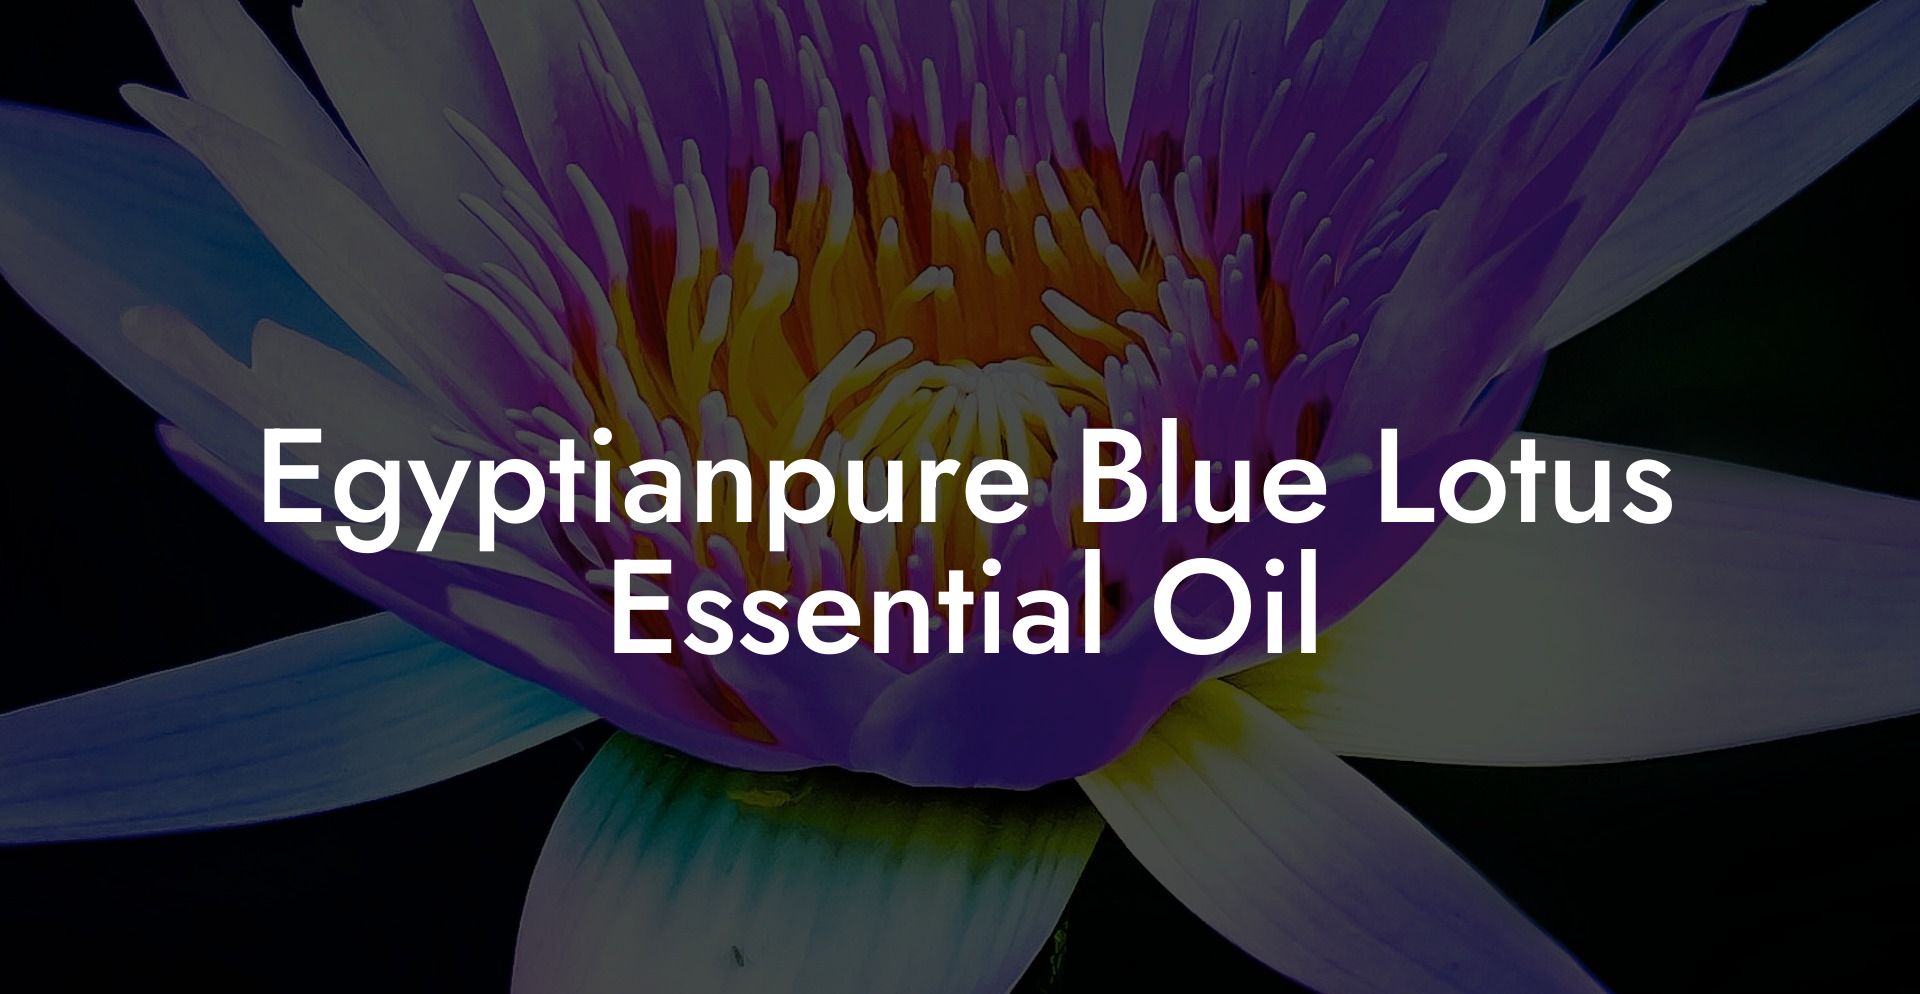 Egyptianpure Blue Lotus Essential Oil